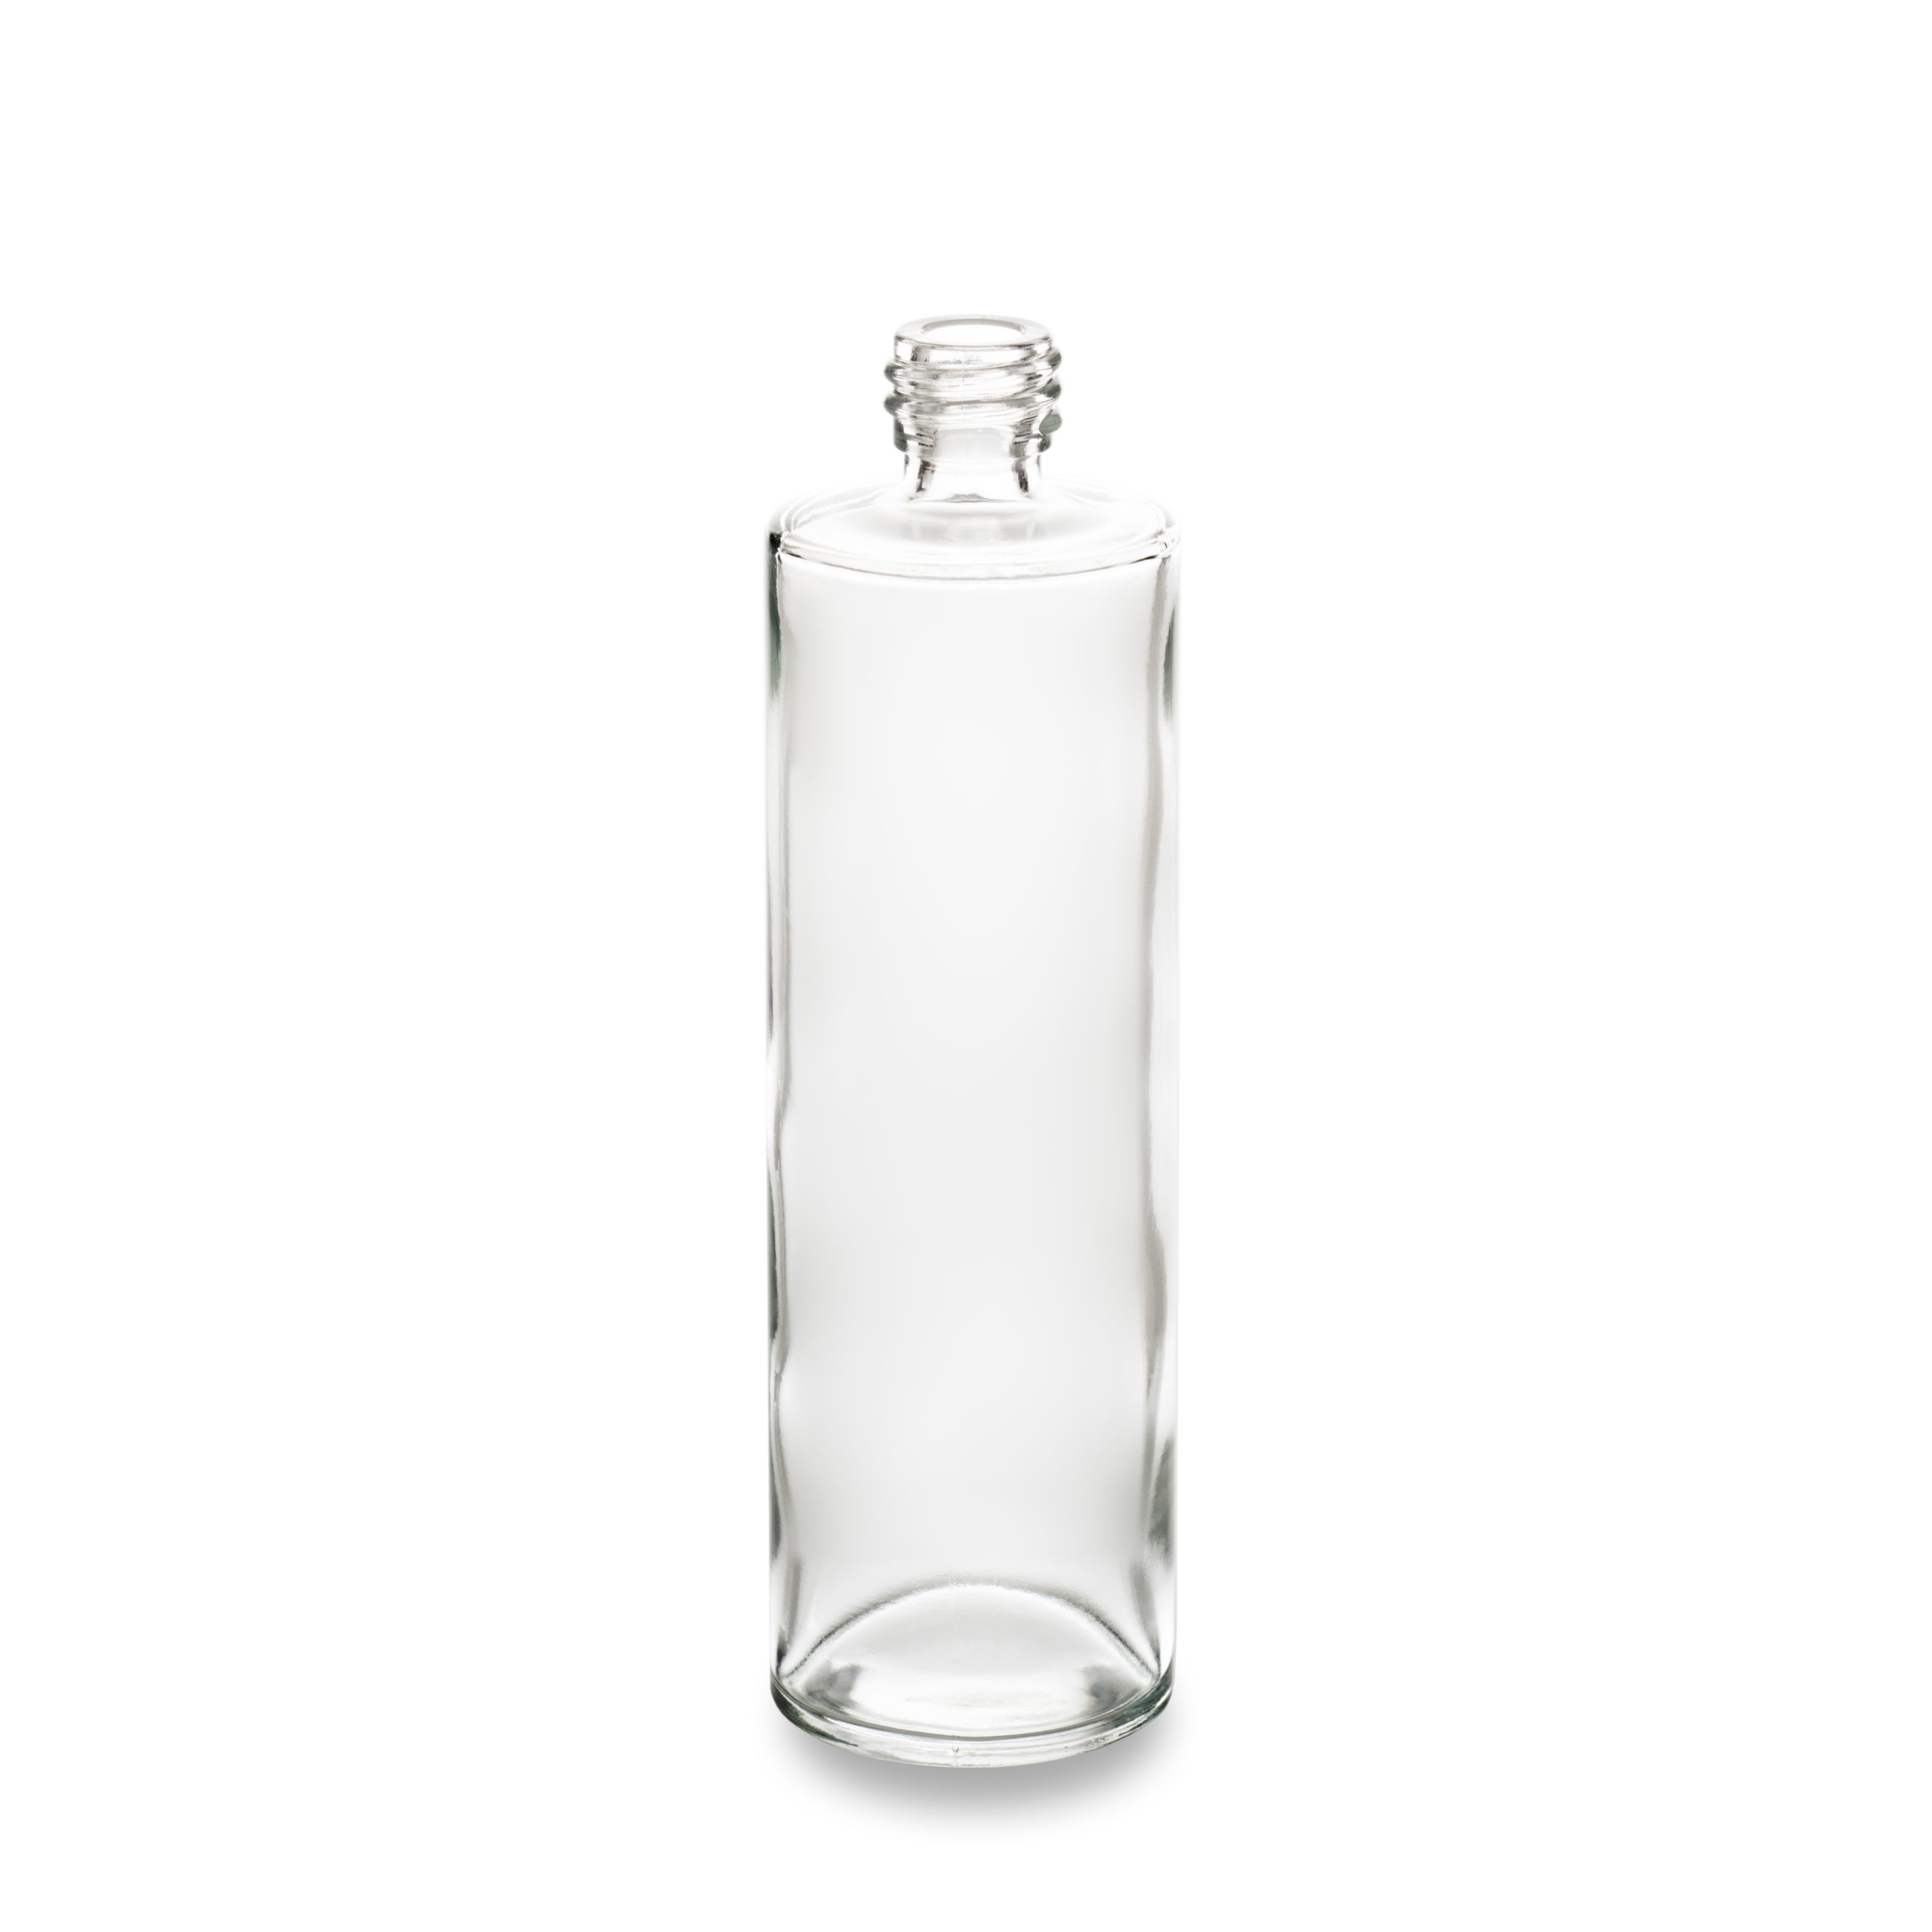 Orion 100 ml ring GCMI 18/415, the cosmetic glass bottle from Embalforme